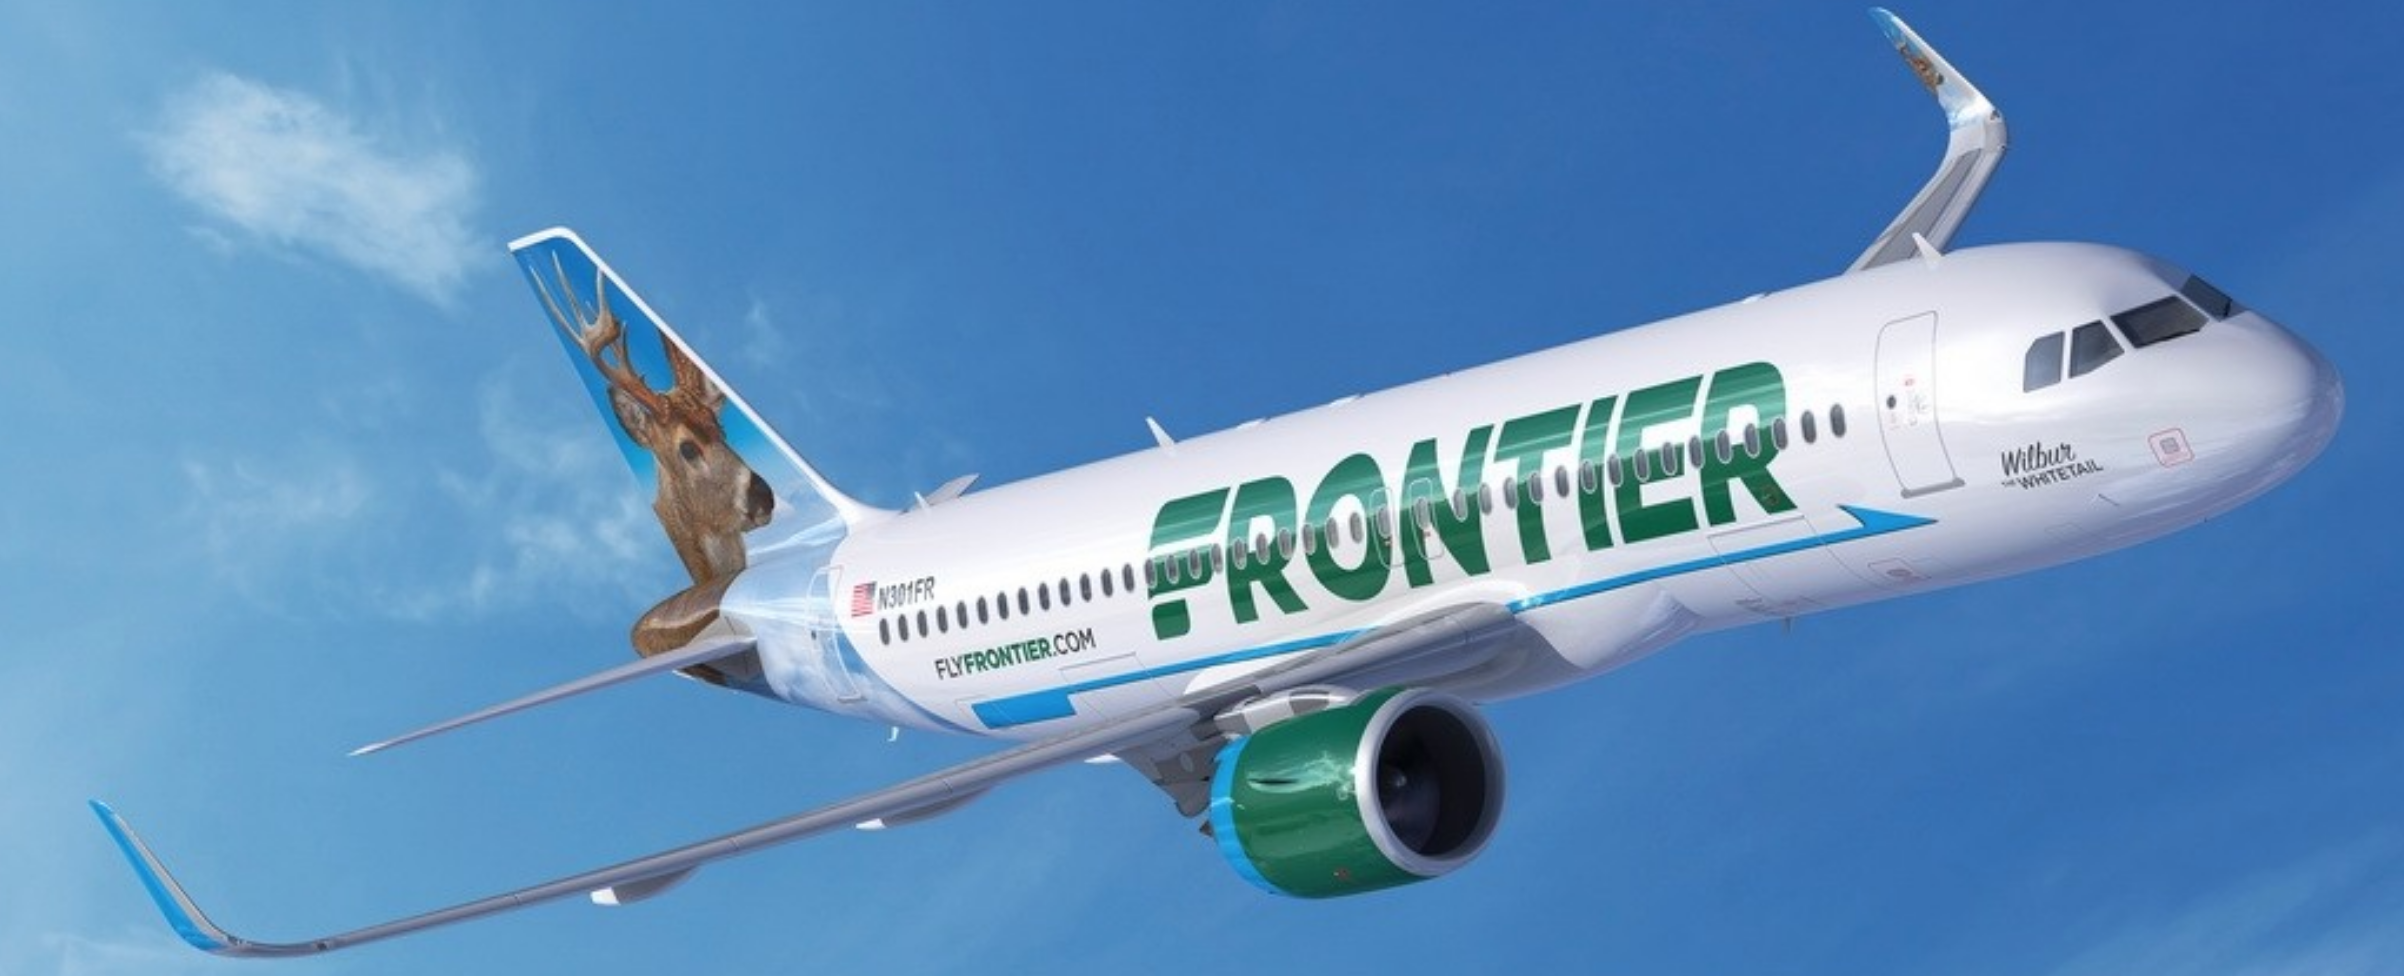 Frontier is shaking things up in the ULCC world.